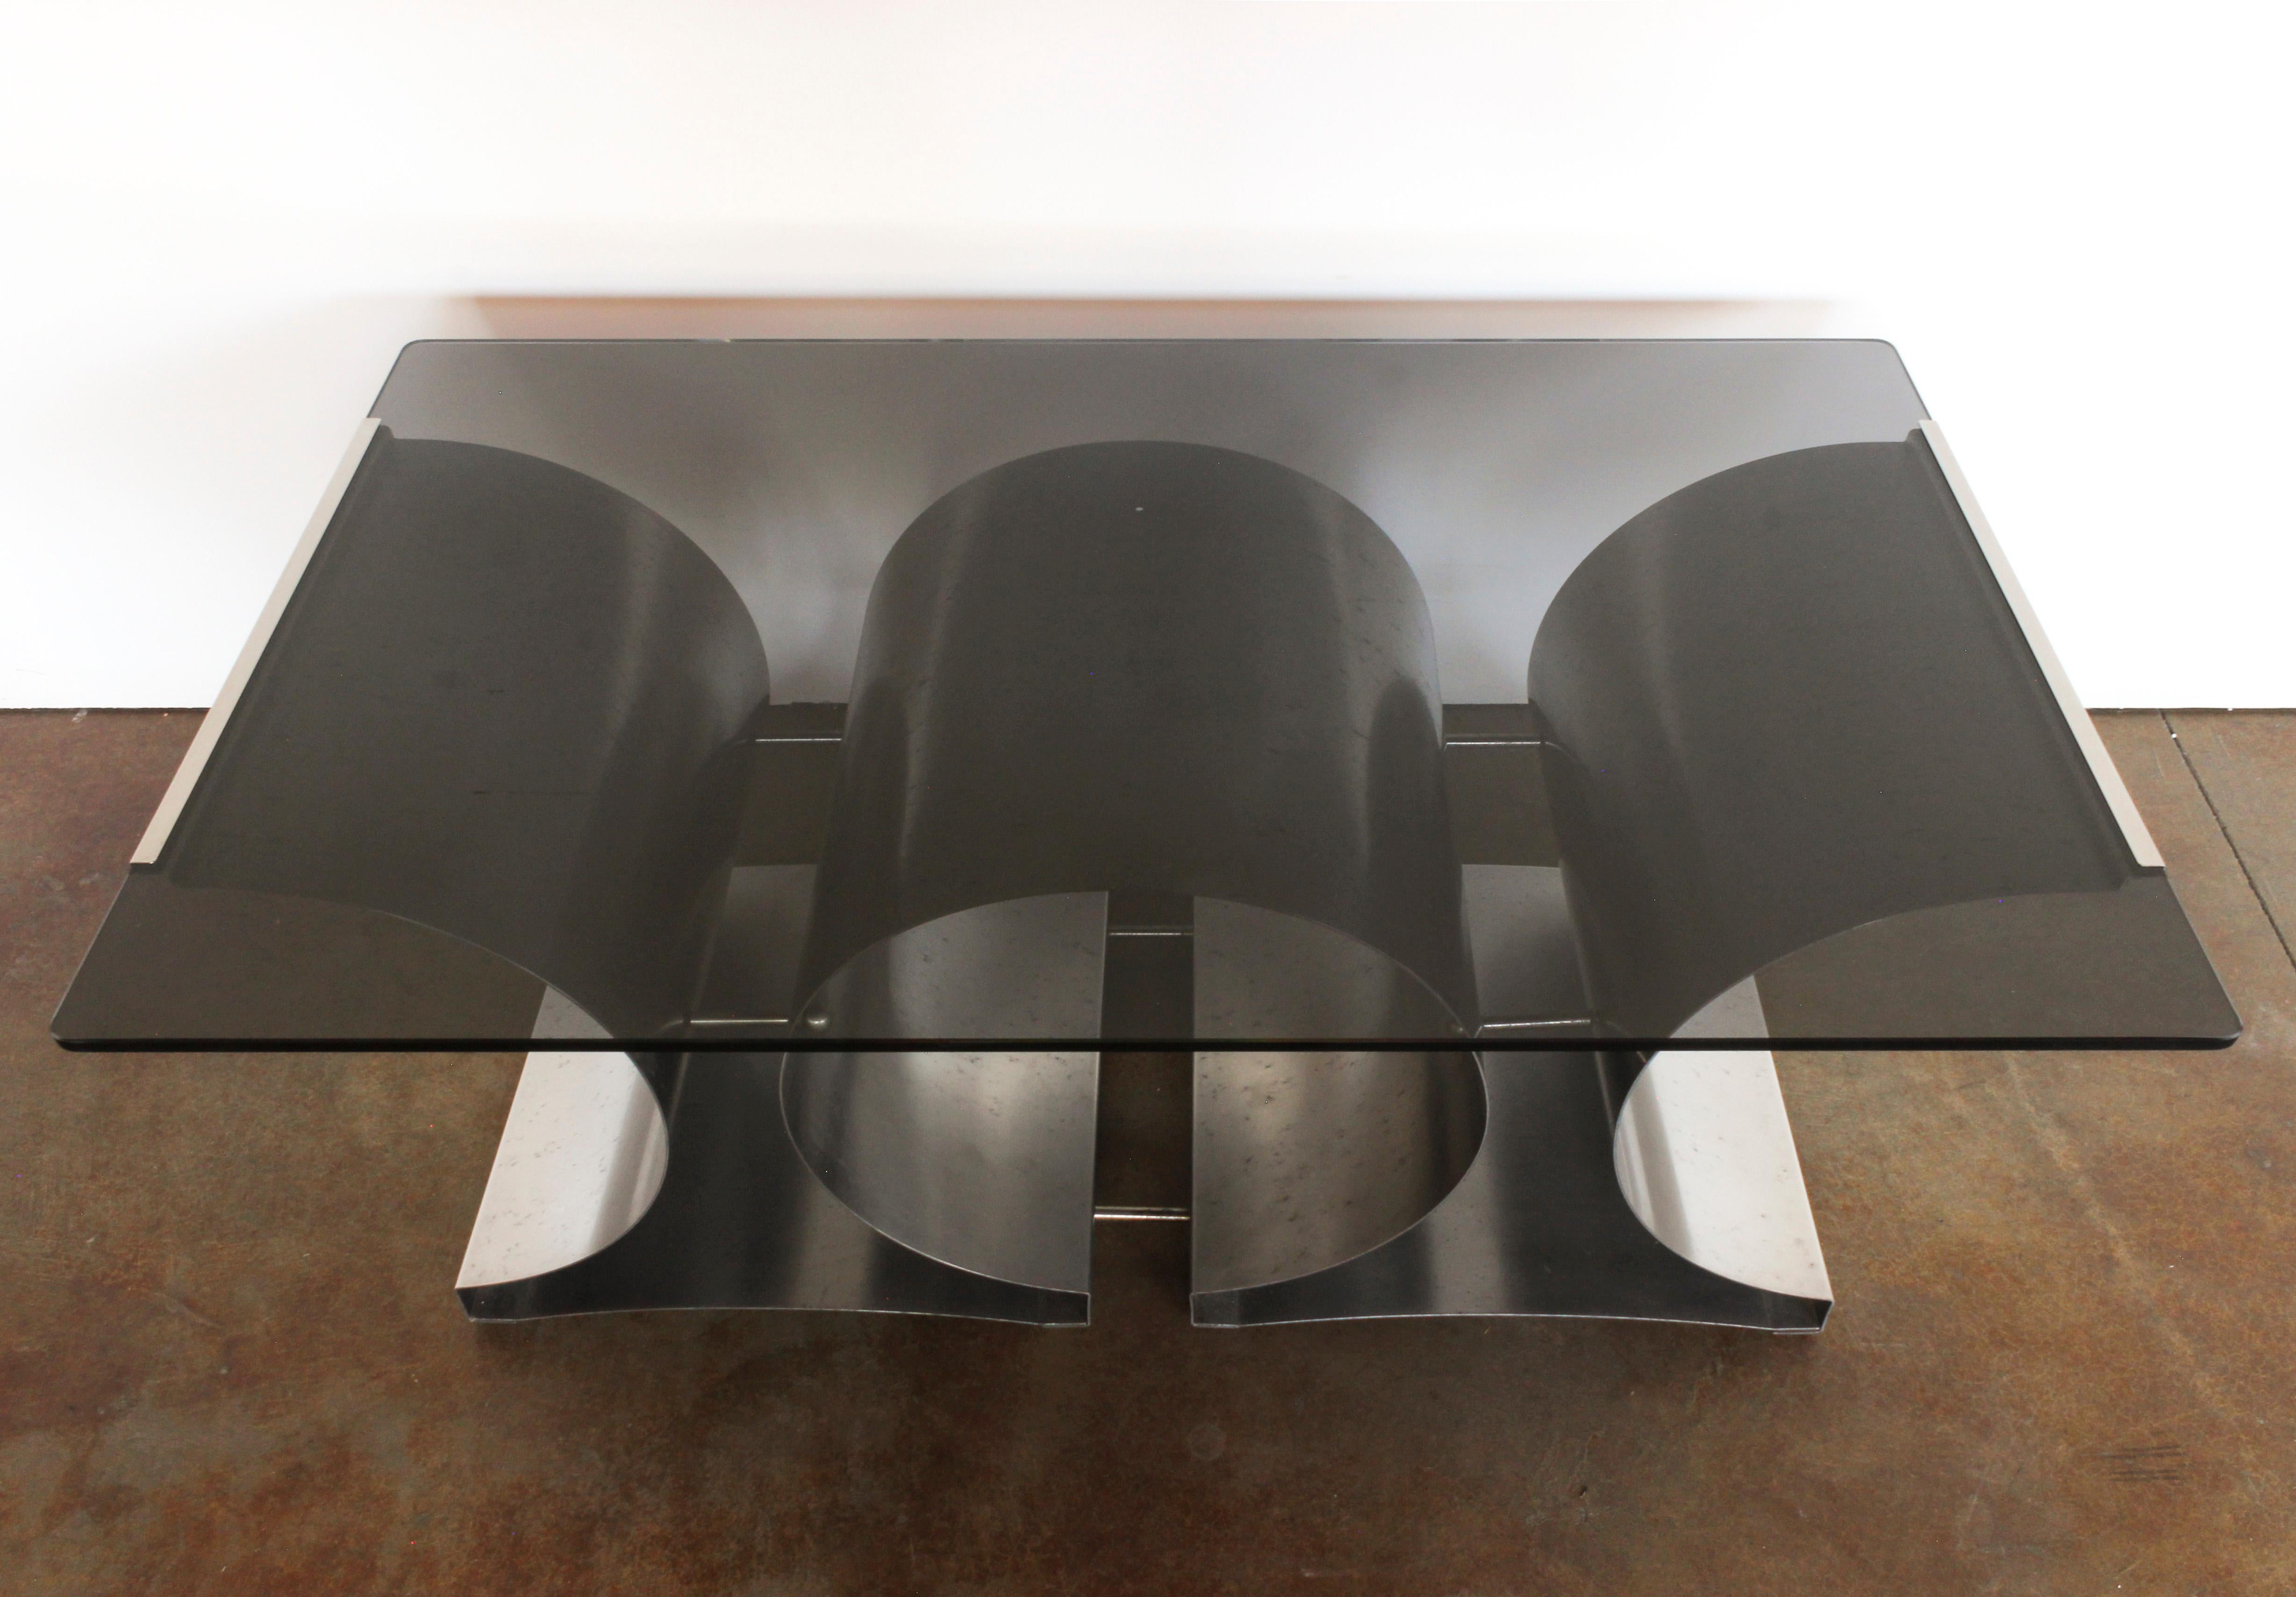 Steel and Glass Coffee Table by Francois Monnet for Kappa, French, c. 1970 For Sale 1